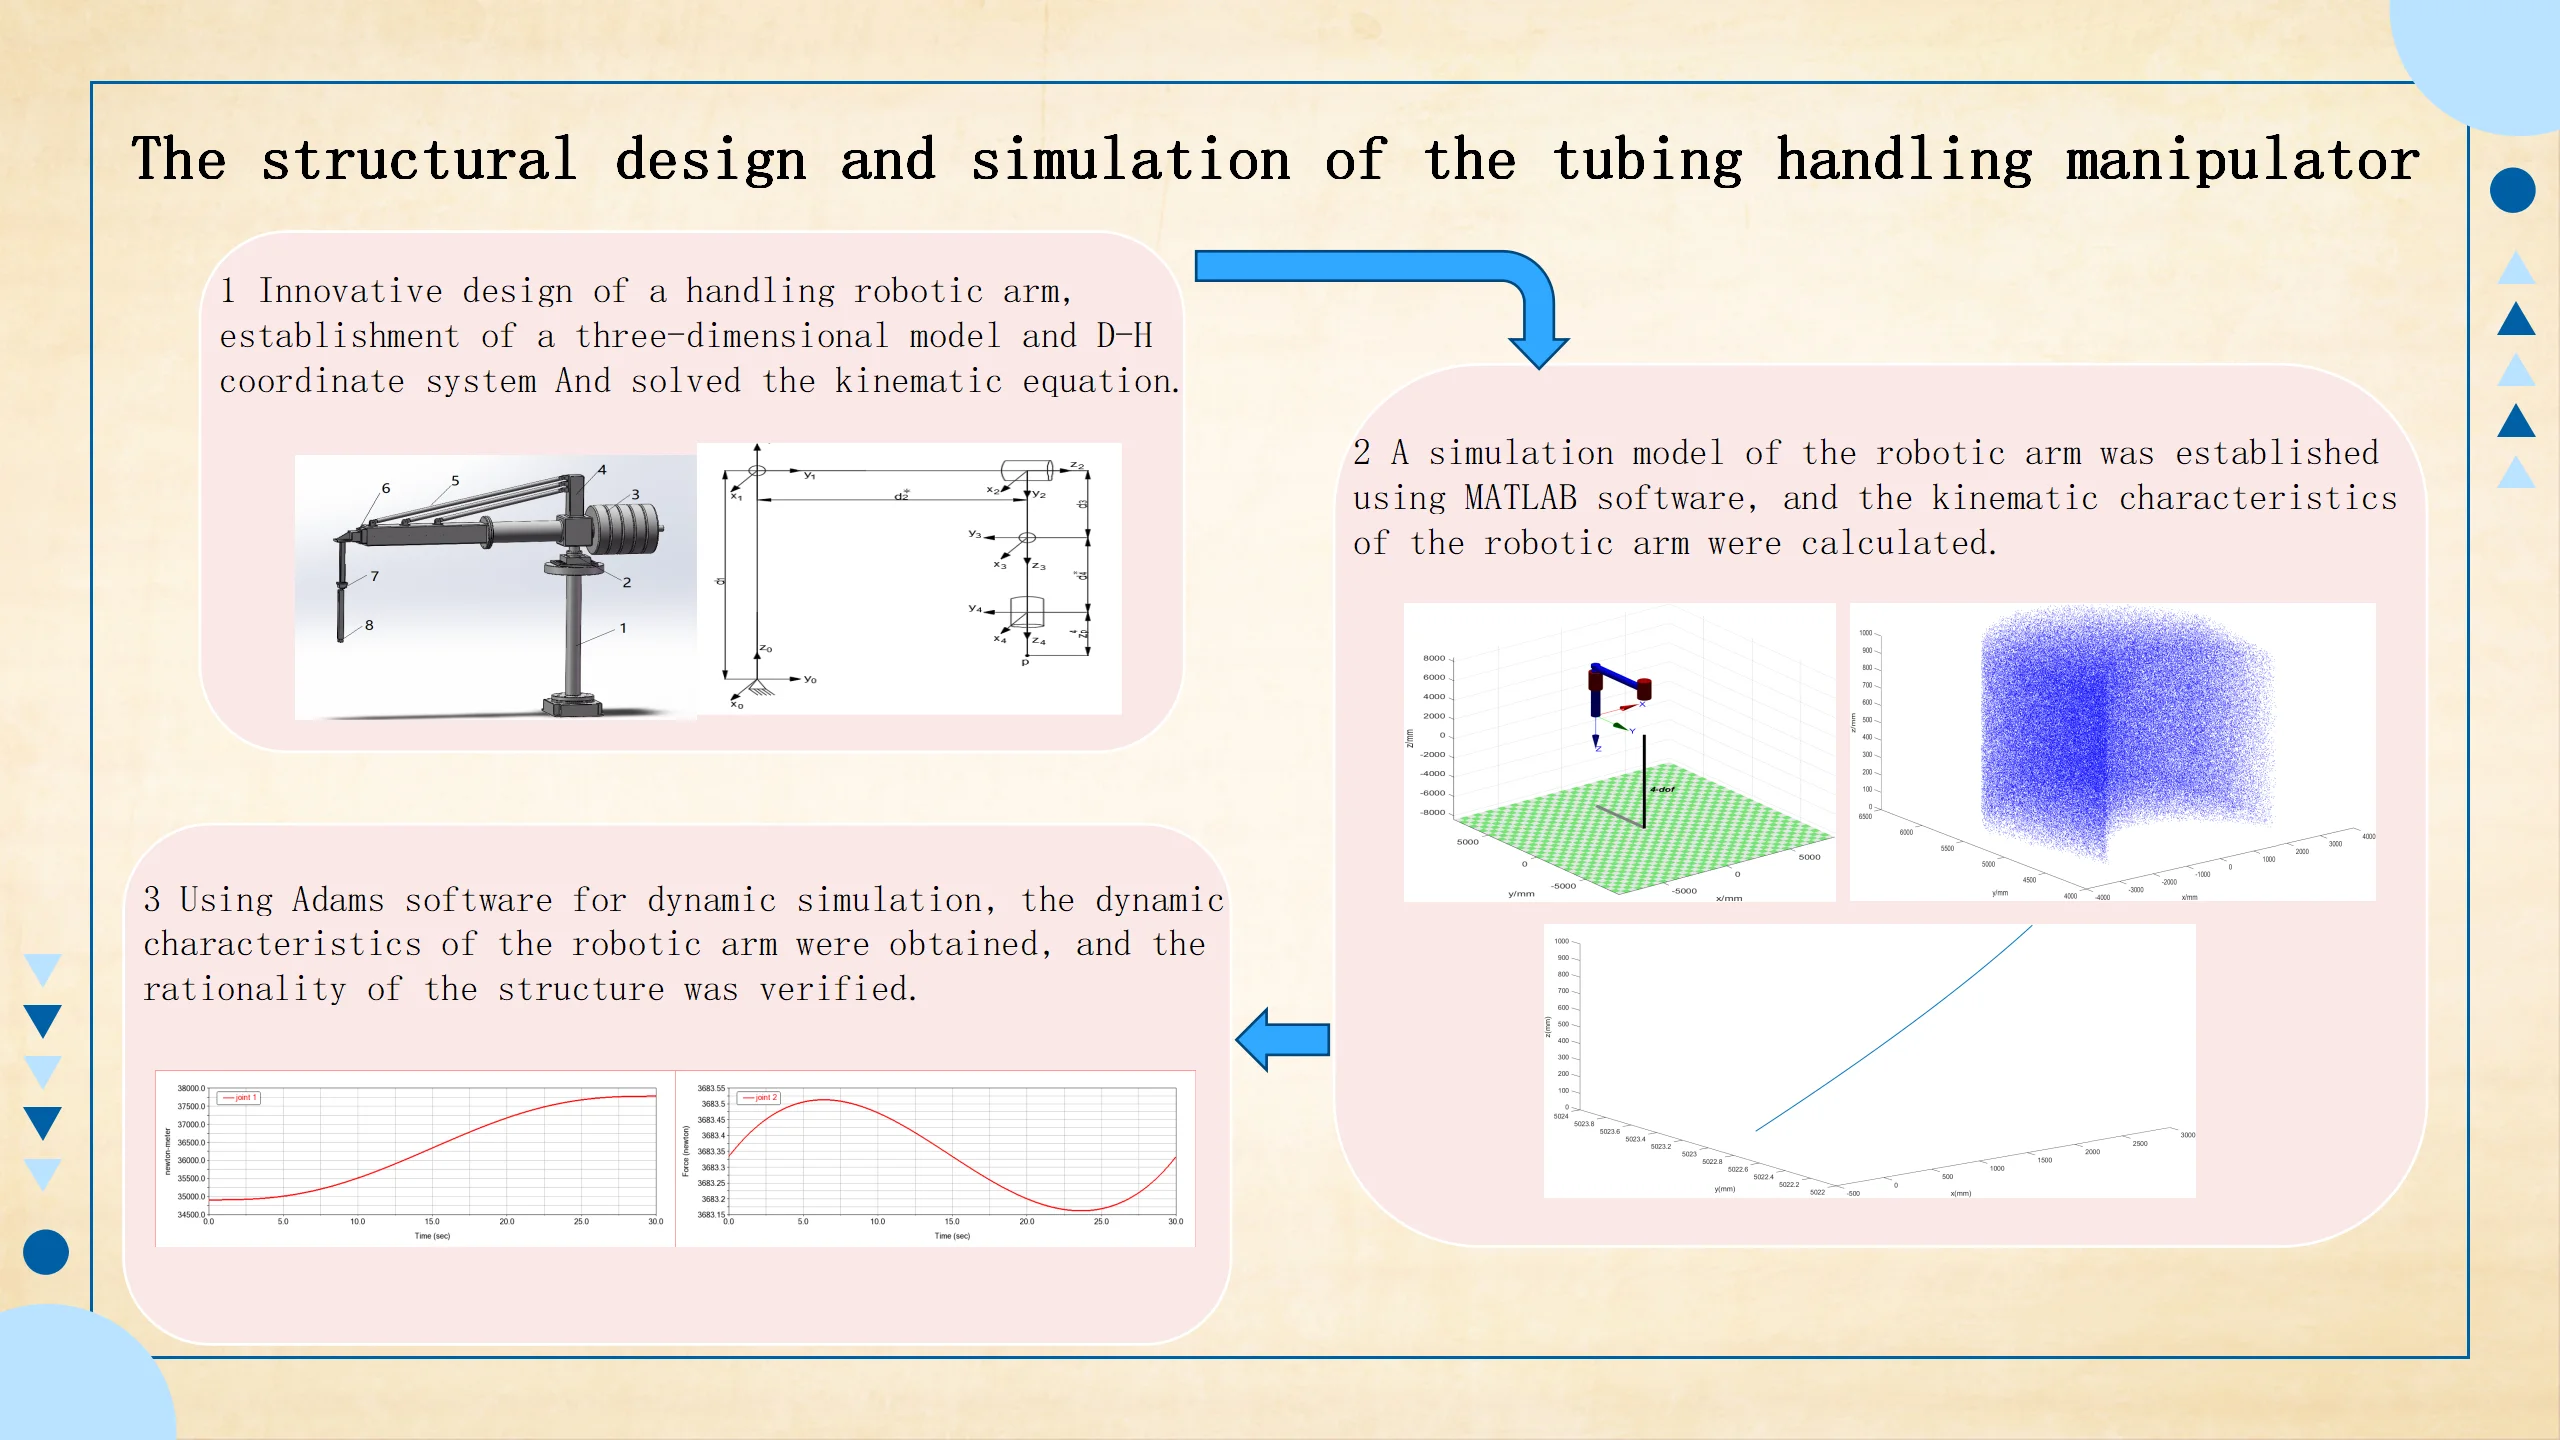 The structural design and simulation of the tubing handling manipulator